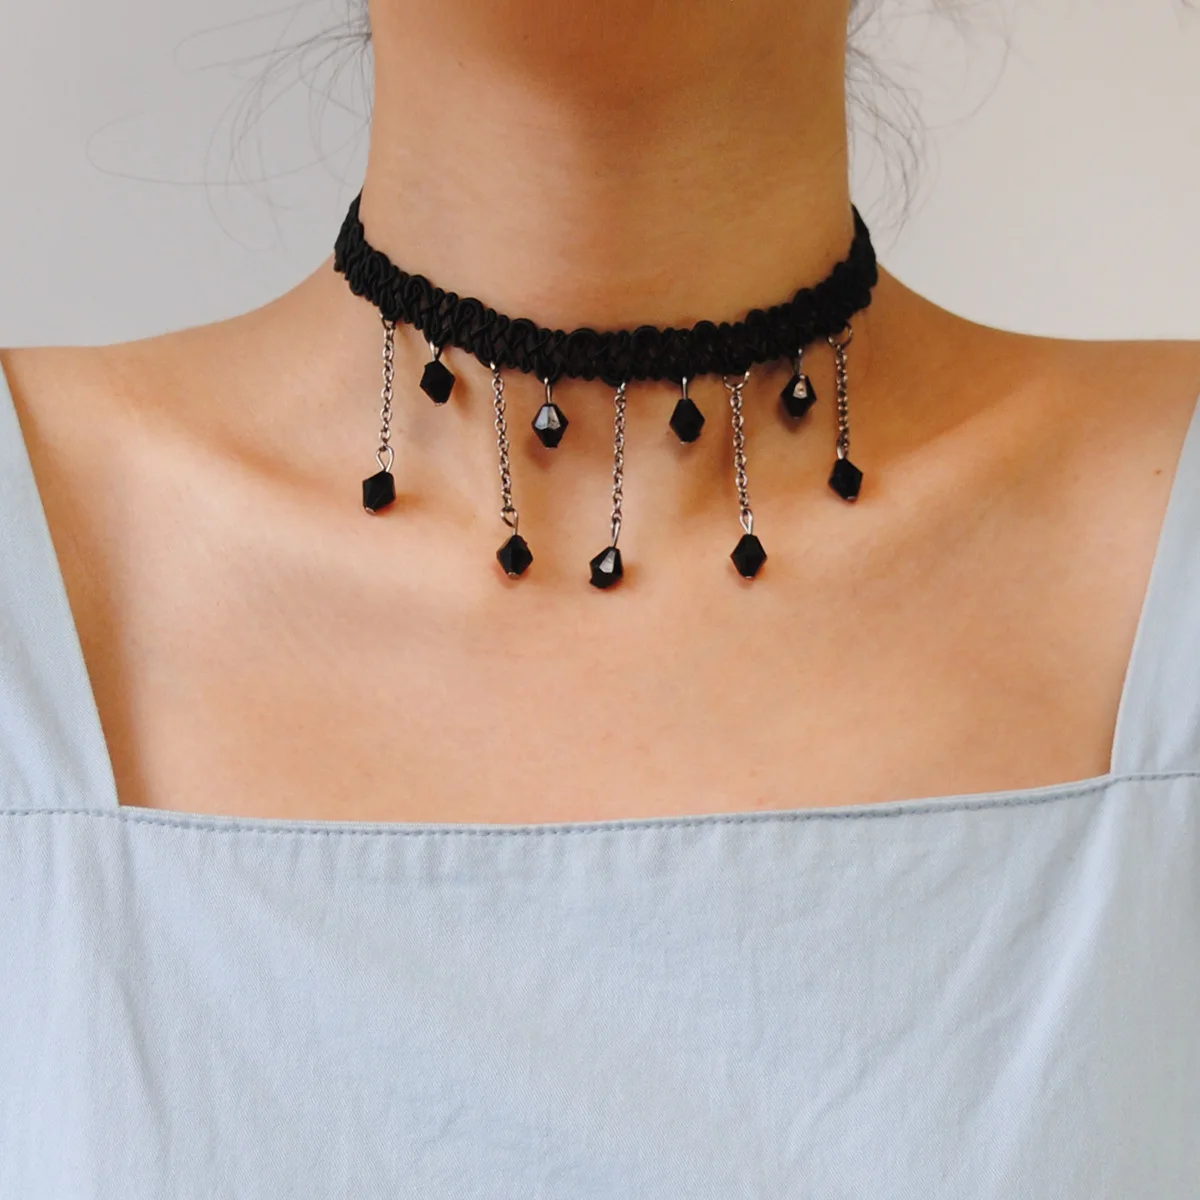 Handmade Black Beaded Gothic Emo Lace Choker Necklace By The Colourful Aura